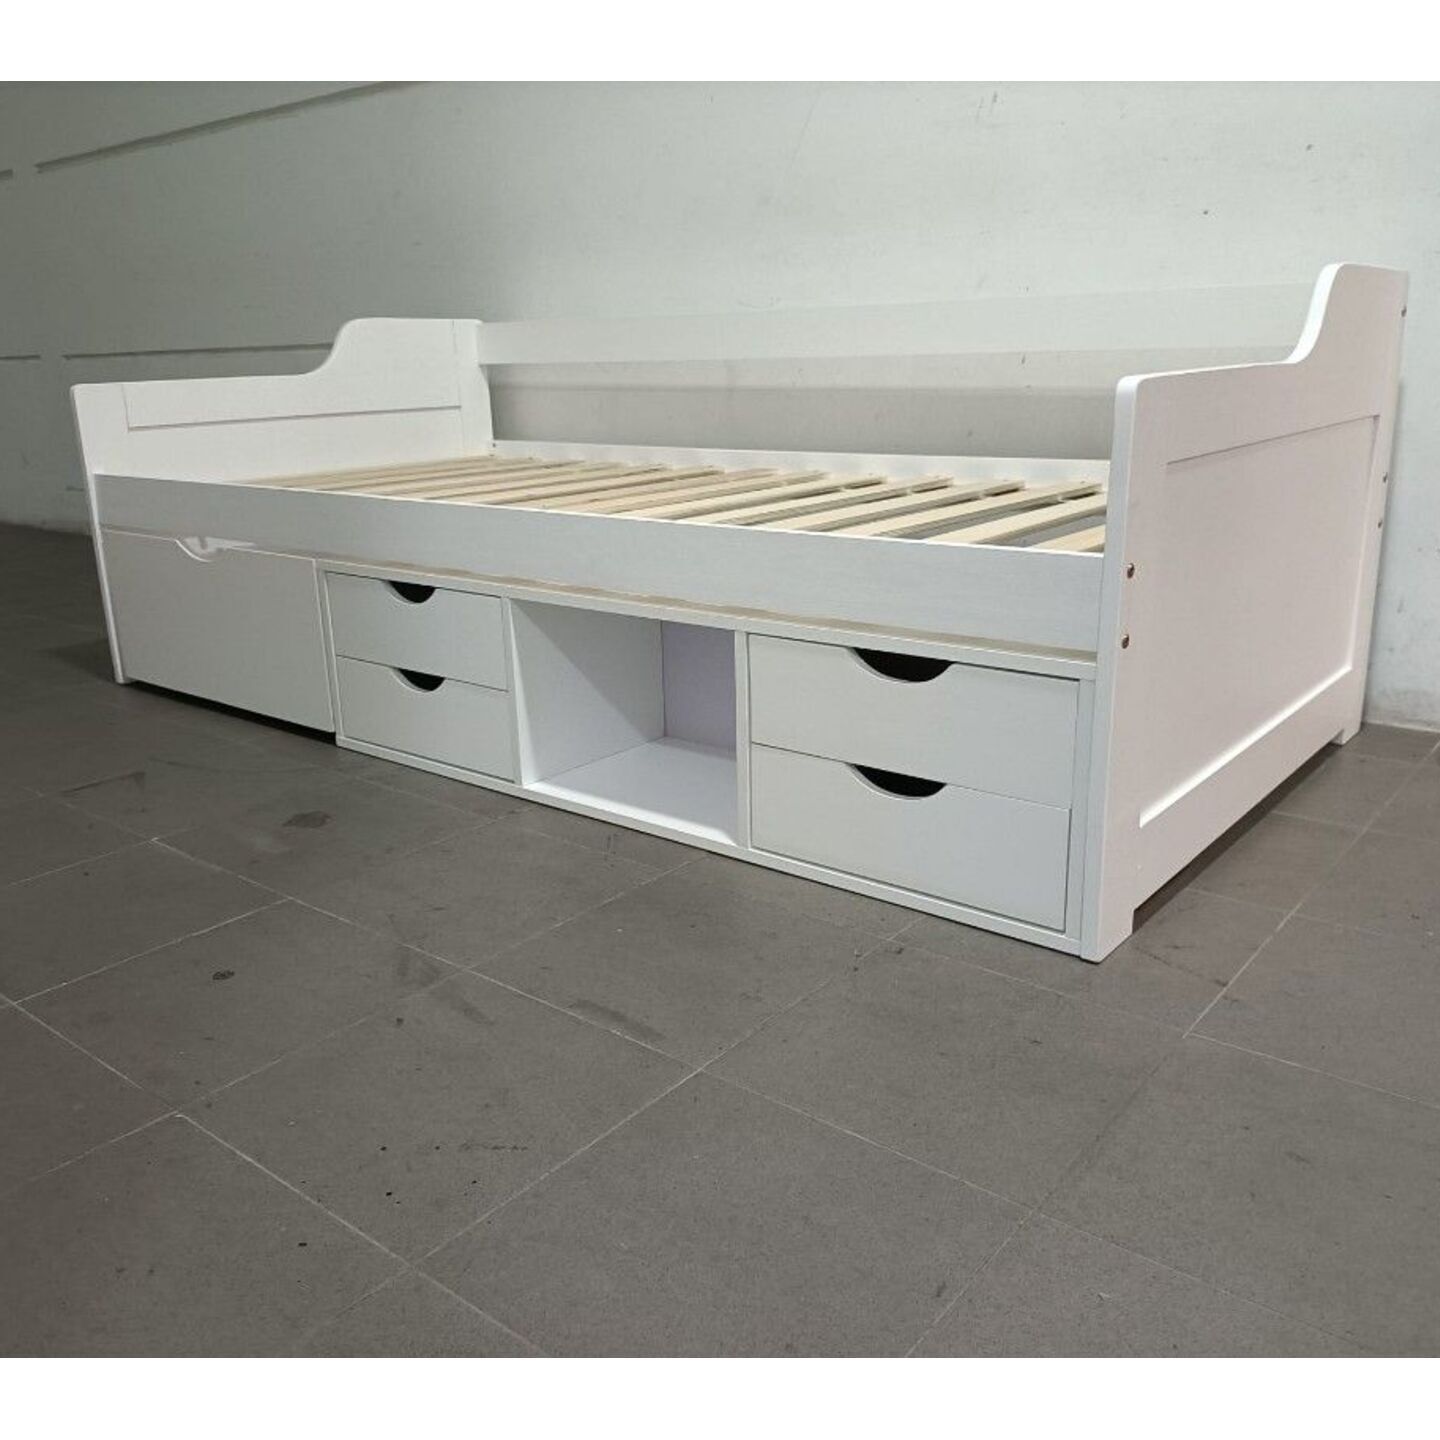 RUZENDA Wooden Single Day Bed with Drawers in WHITE